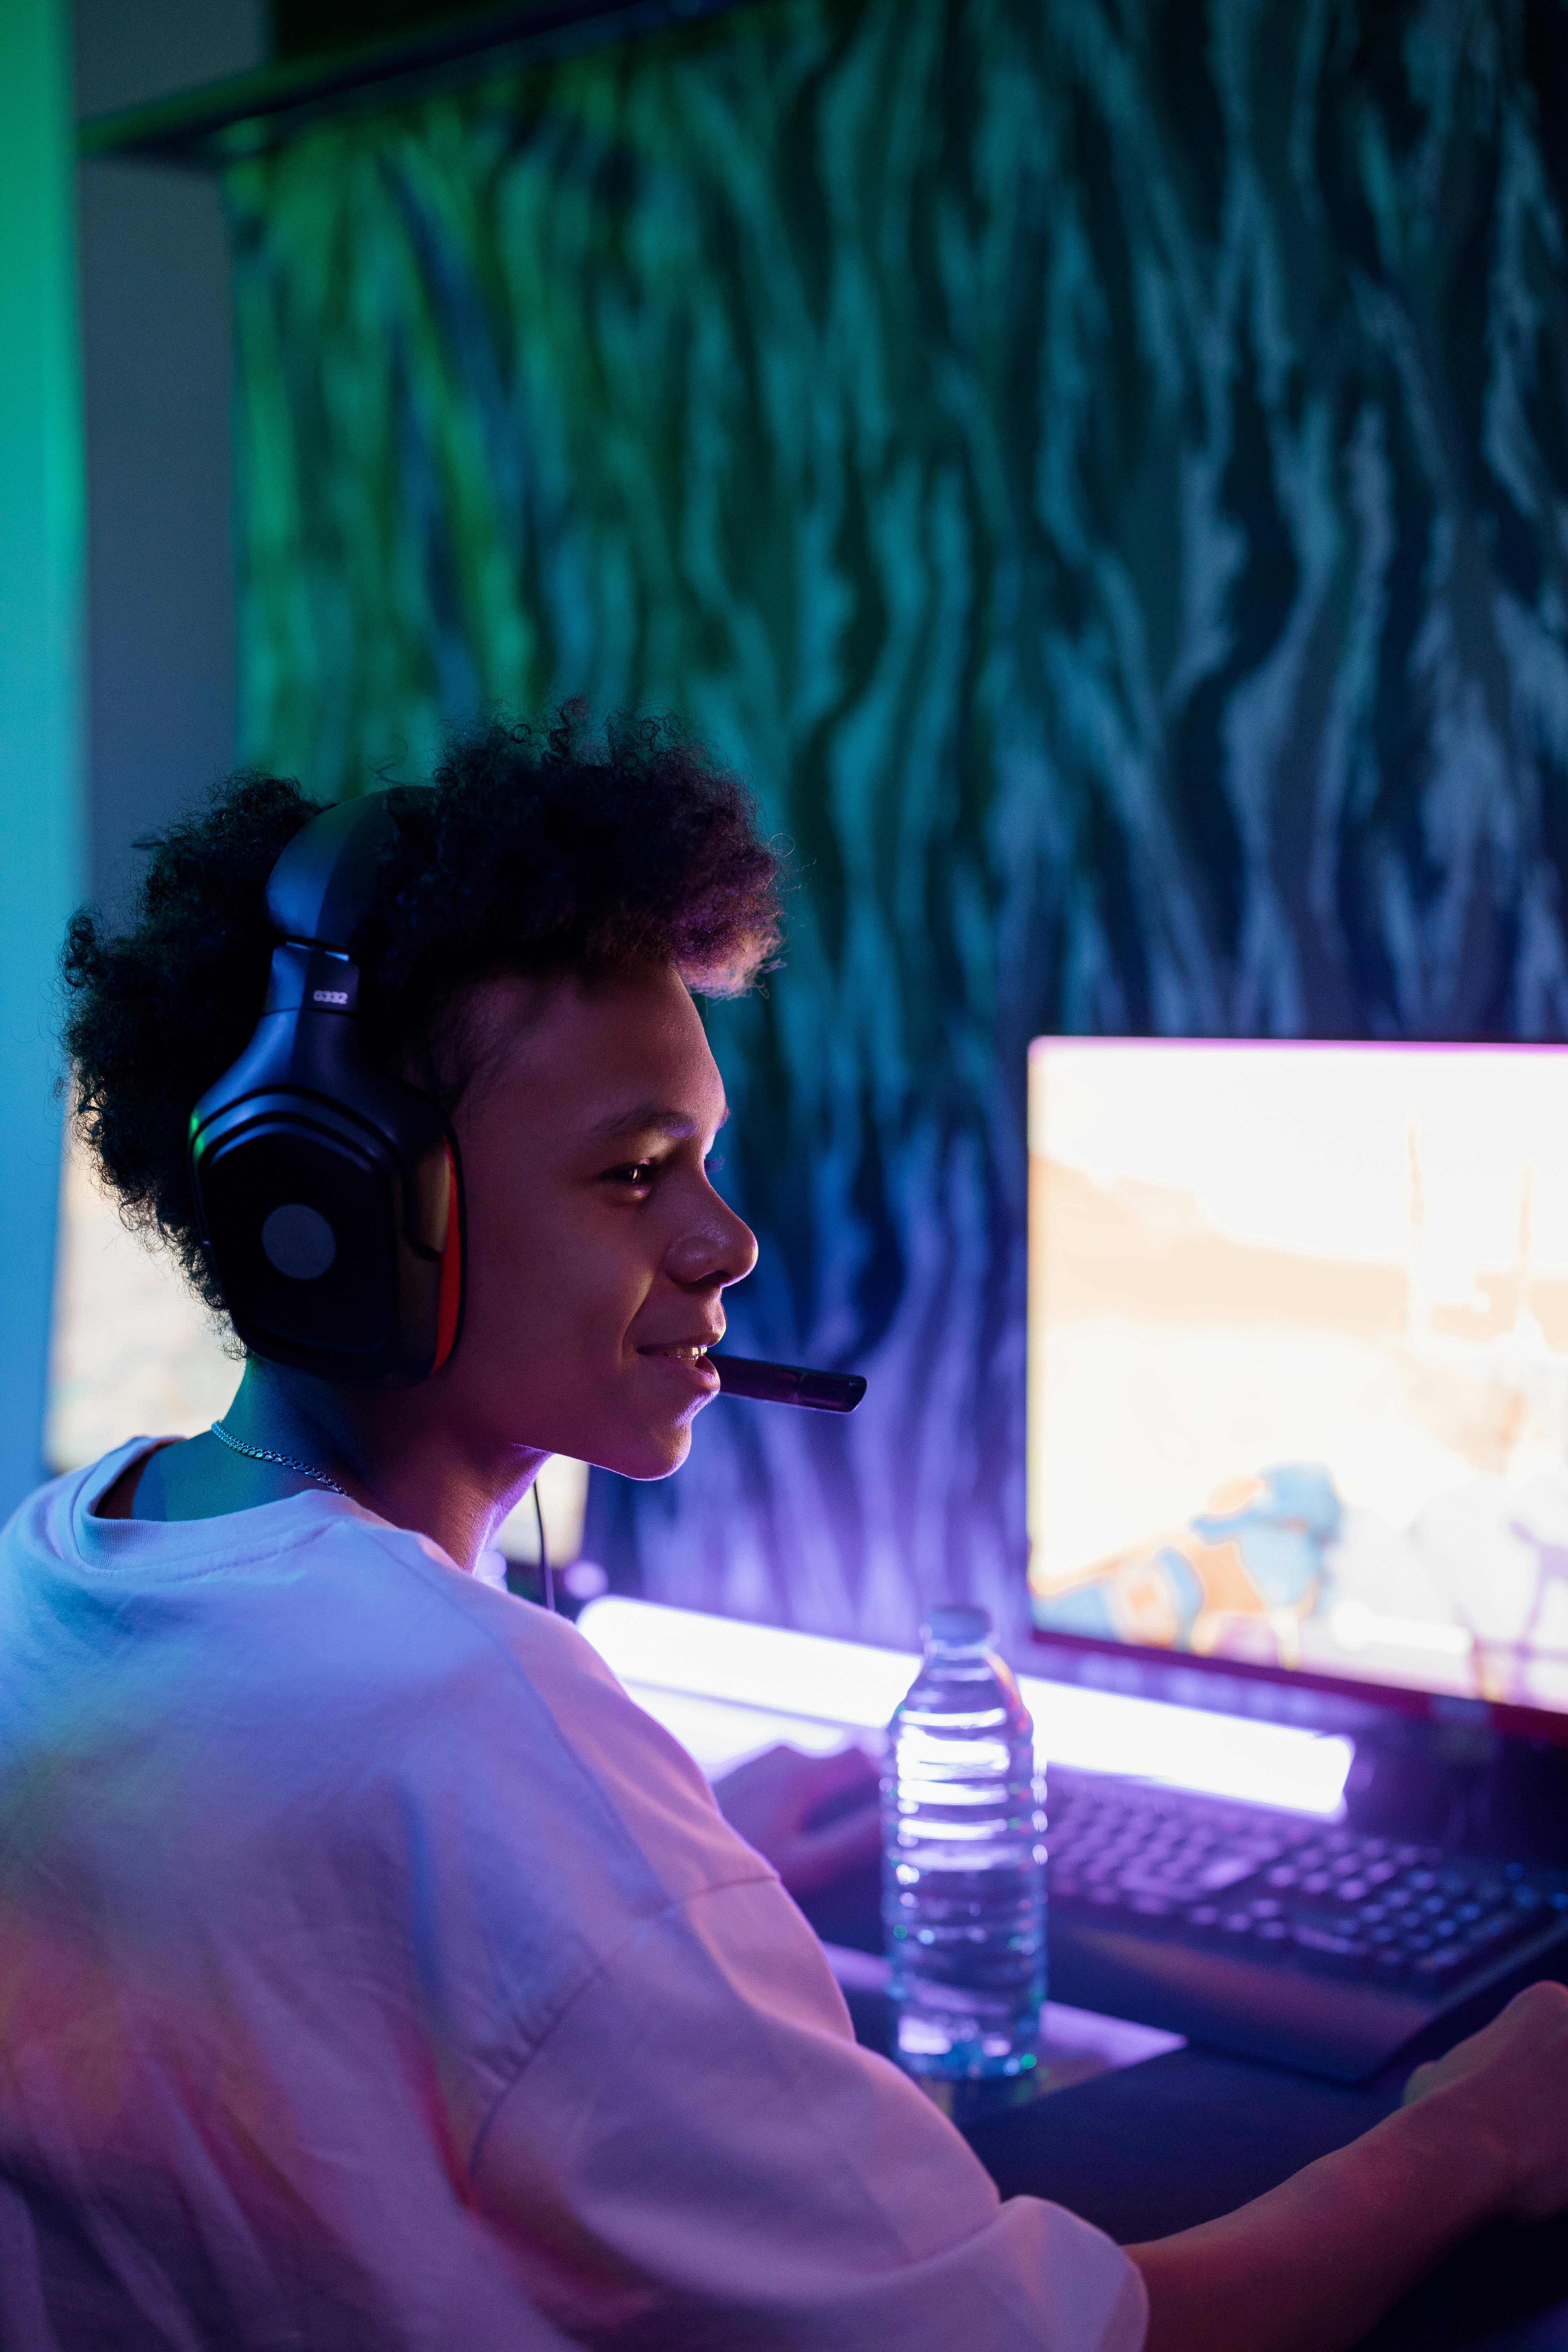 500+ Pc Gaming Pictures  Download Free Images & Stock Photos on Unsplash